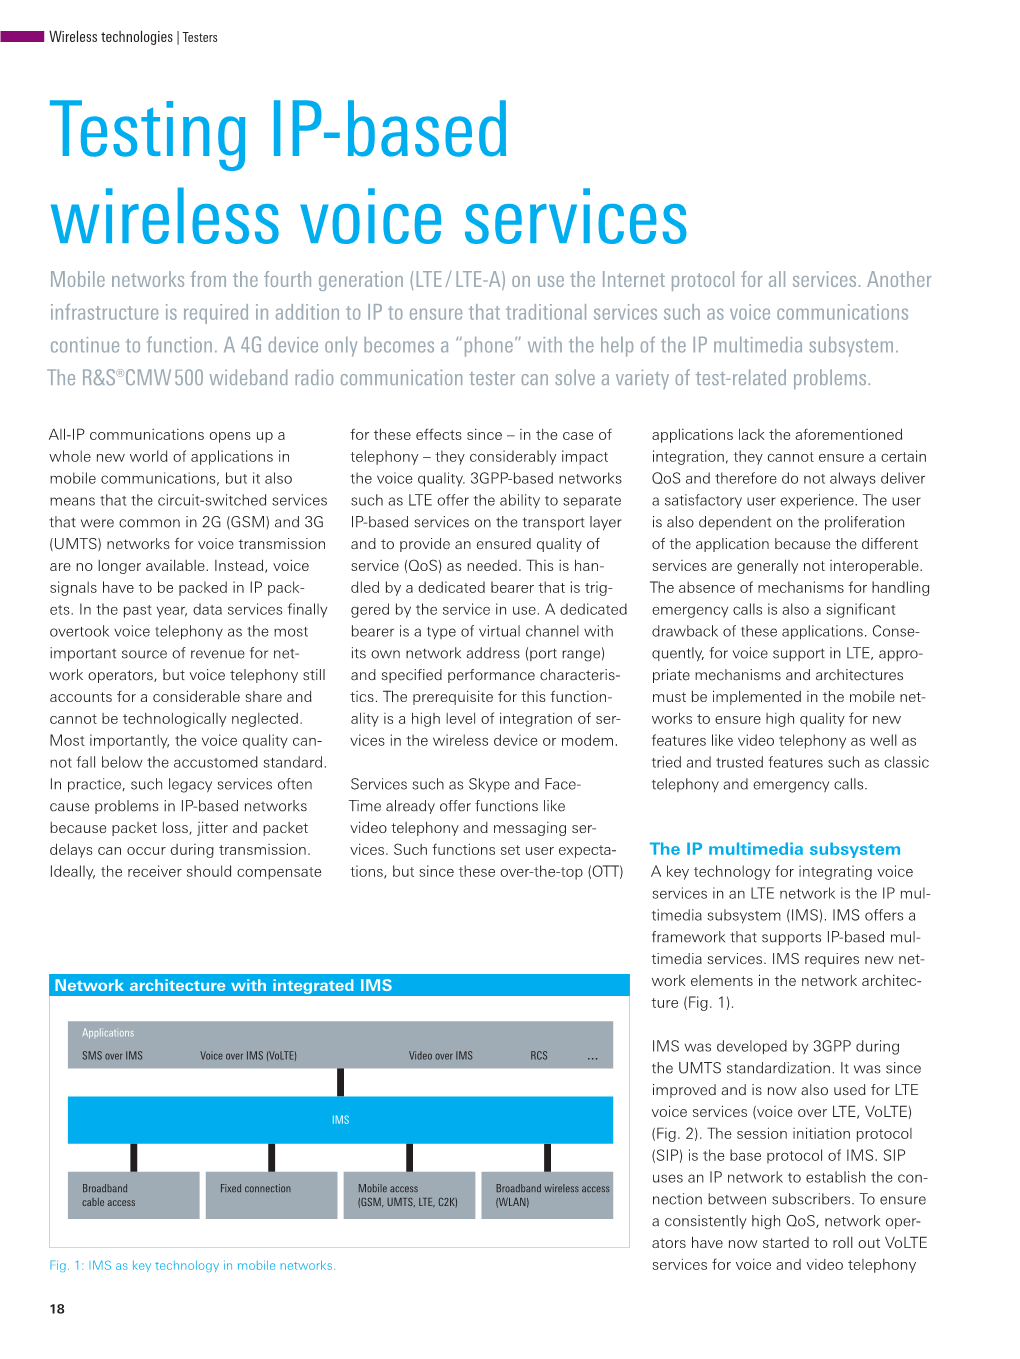 Testing IP-Based Wireless Voice Services Mobile Networks from the Fourth Generation (LTE / LTE-A) on Use the Internet Protocol for All Services